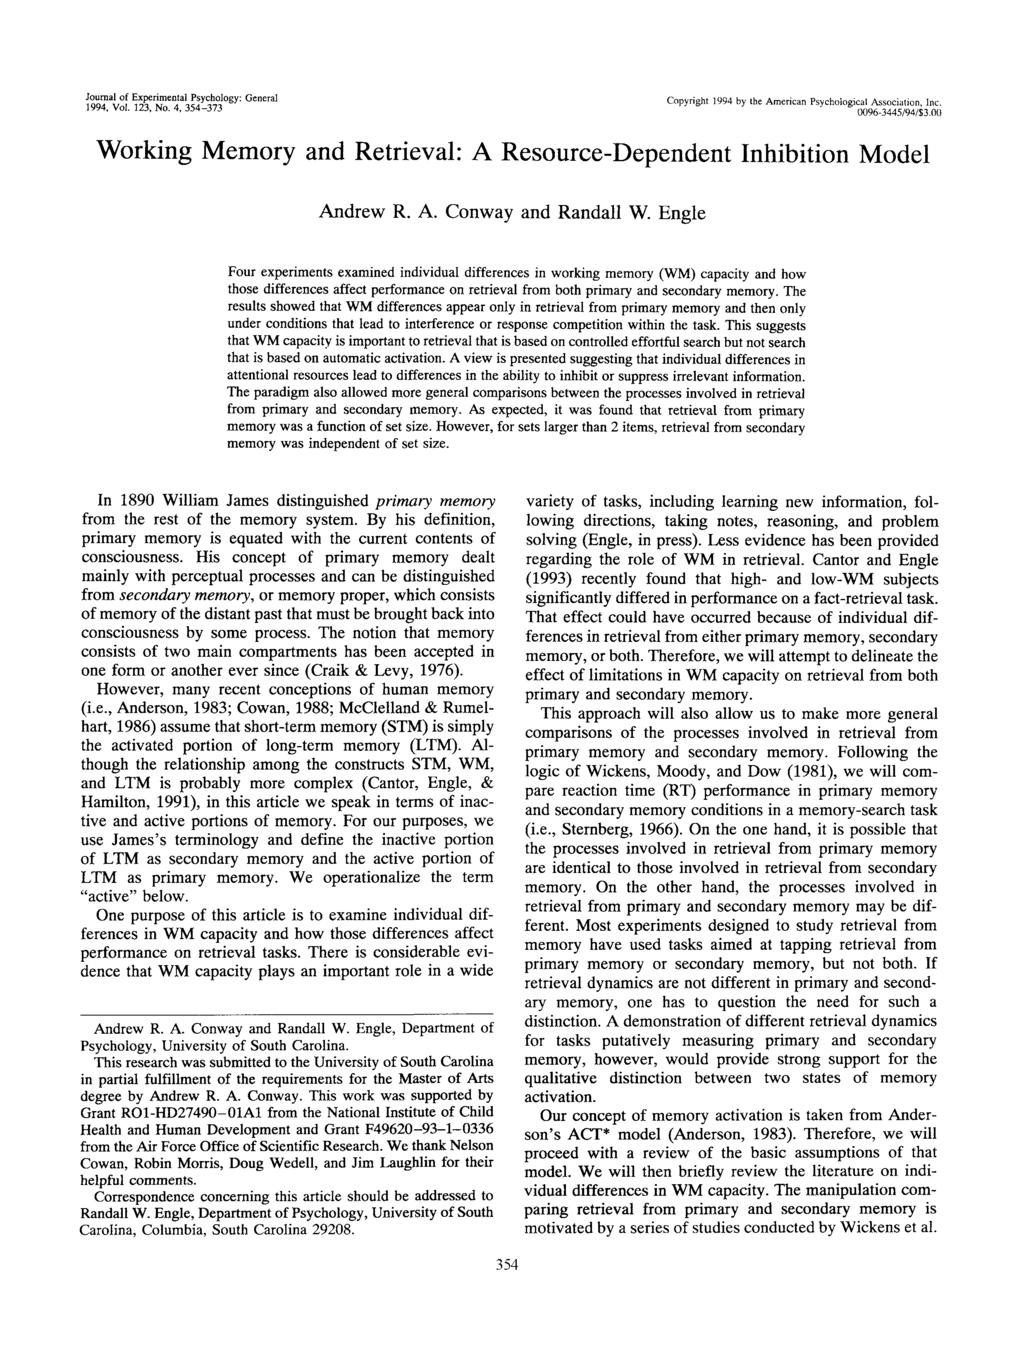 Journal of Experimental Psychology: General 1994, Vol. 123, No. 4, 354-373 Copyright 1994 by the American Psychological Association Inc 0096-3445/94/S3.